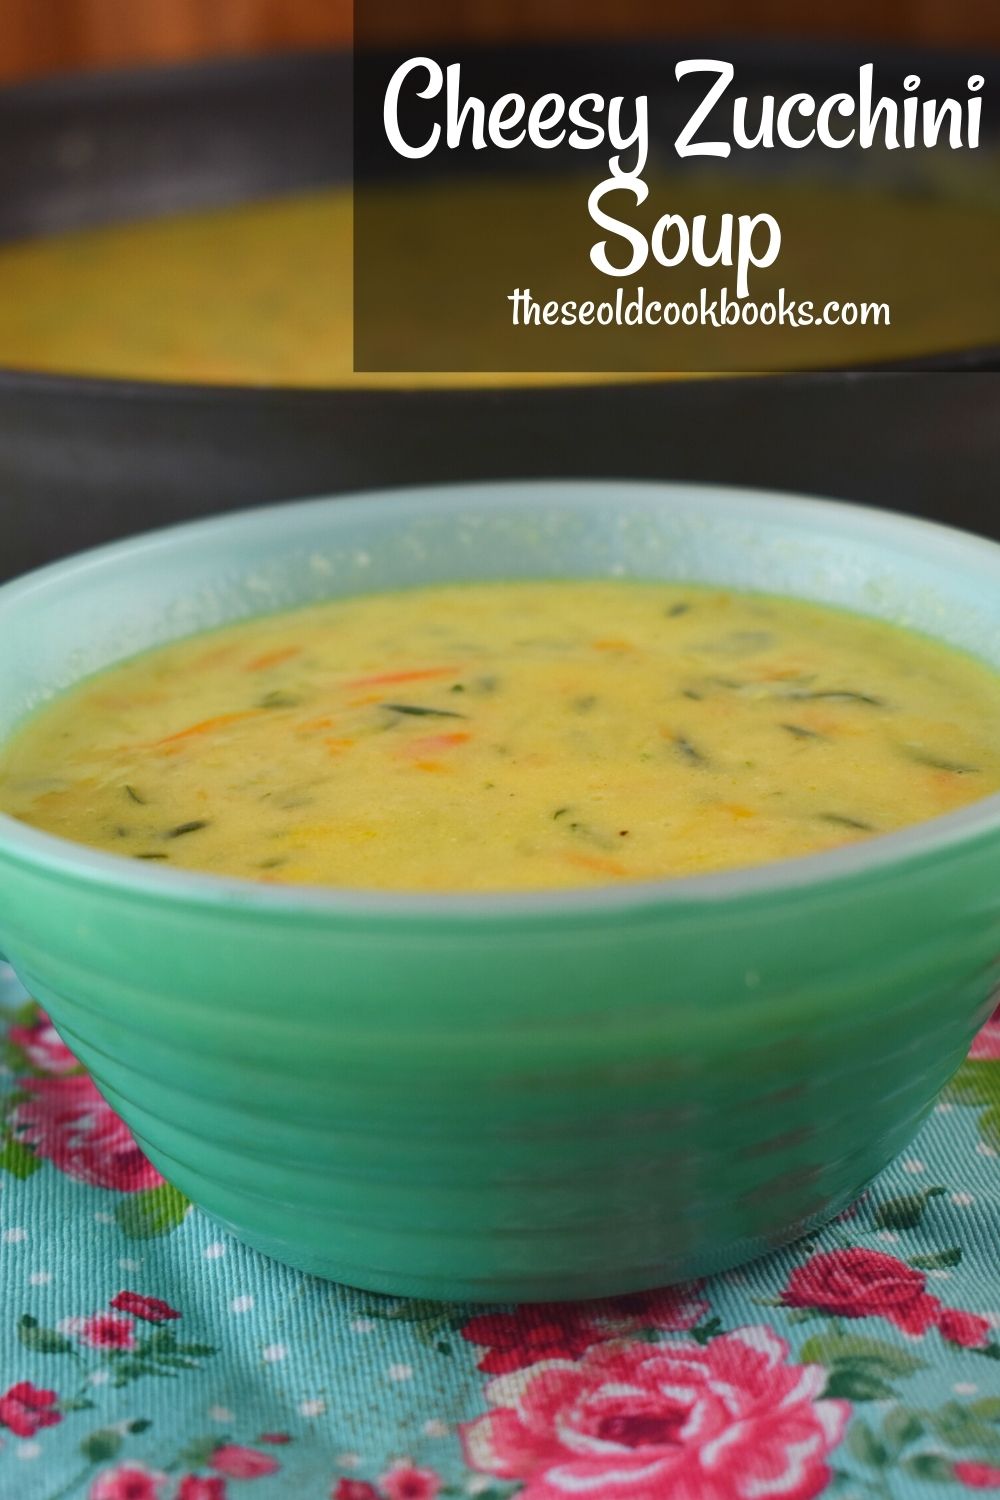 It's easy, it's cheesy, and it's a great way to use up some of your excess zucchini.  Cheesy Zucchini Soup is light enough for the summer months, or freeze your zucchini during summer, and pull it out for this recipe. 